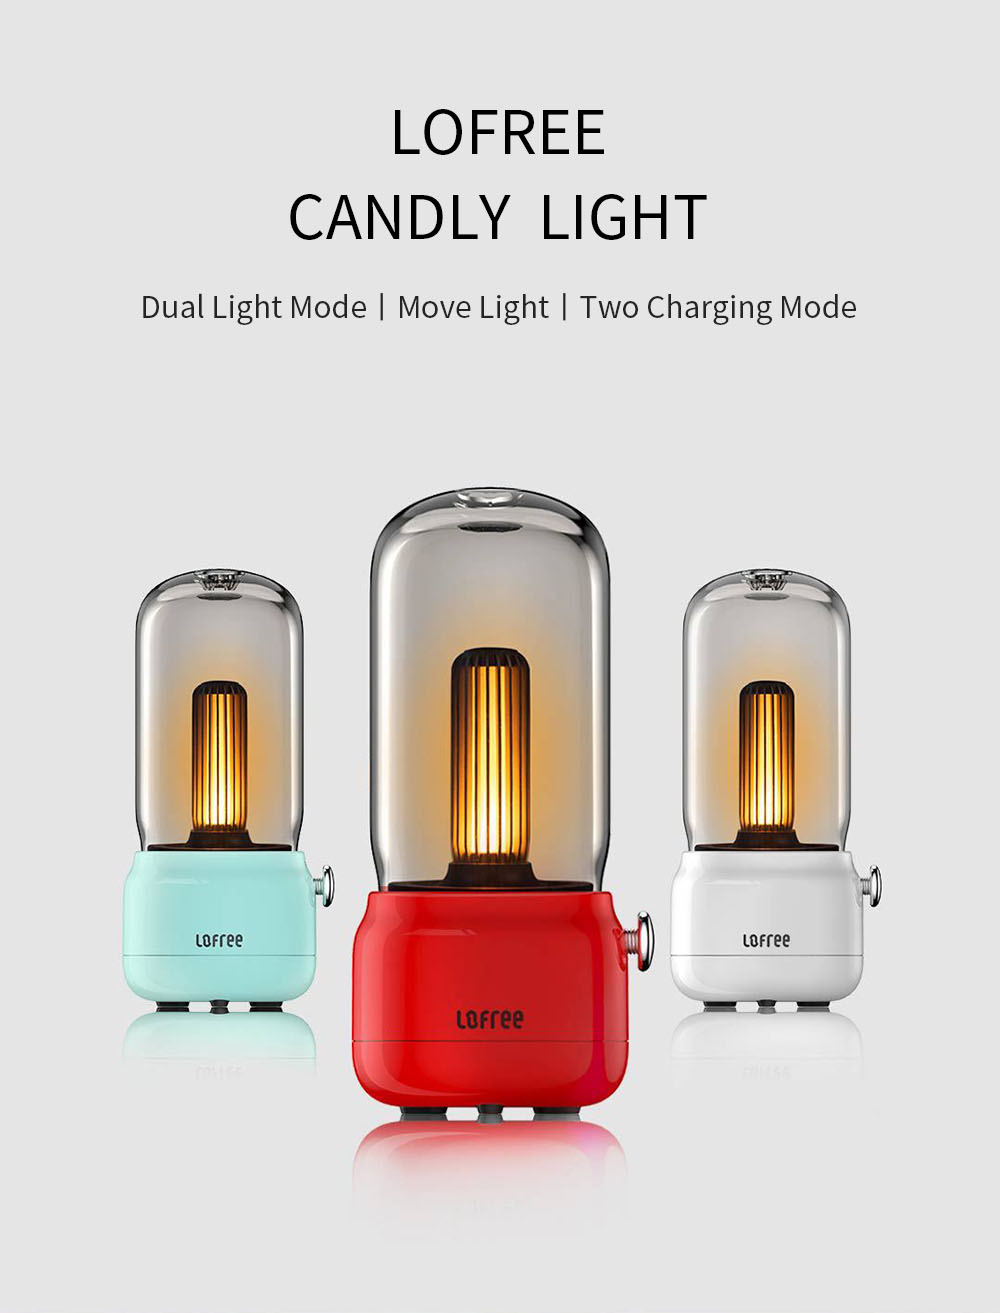 Xiaomi Lofree Candly Light Portable 1800K LED Sound Source Induction Night Light Table Lamp Decor Creative Gifts